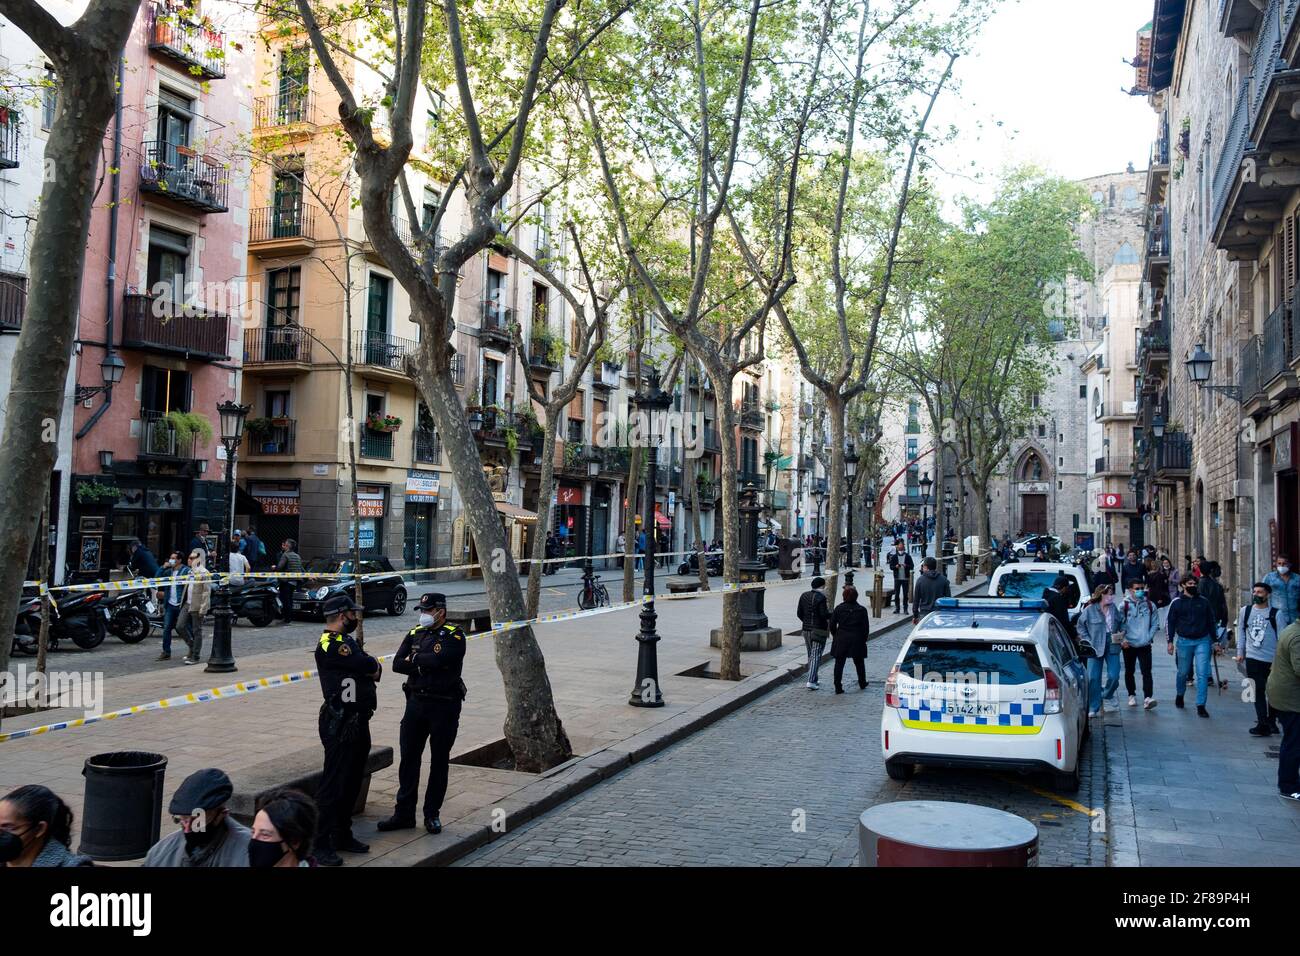 Catalan urban police patrols the Passeig del Born square in Barcelona, Spain on 2 April 2021, to prevent crowds of young people to gather and drink after the curfew in this spot full of bars and restaurant, despite the covid restrictions. Police is cracking down on illegal gatherings and parties in the city as the summer approaches and tourism restarts (Photo by Davide Bonaldo/Sipa USA) (Photo by Davide Bonaldo/Sipa USA) Stock Photo